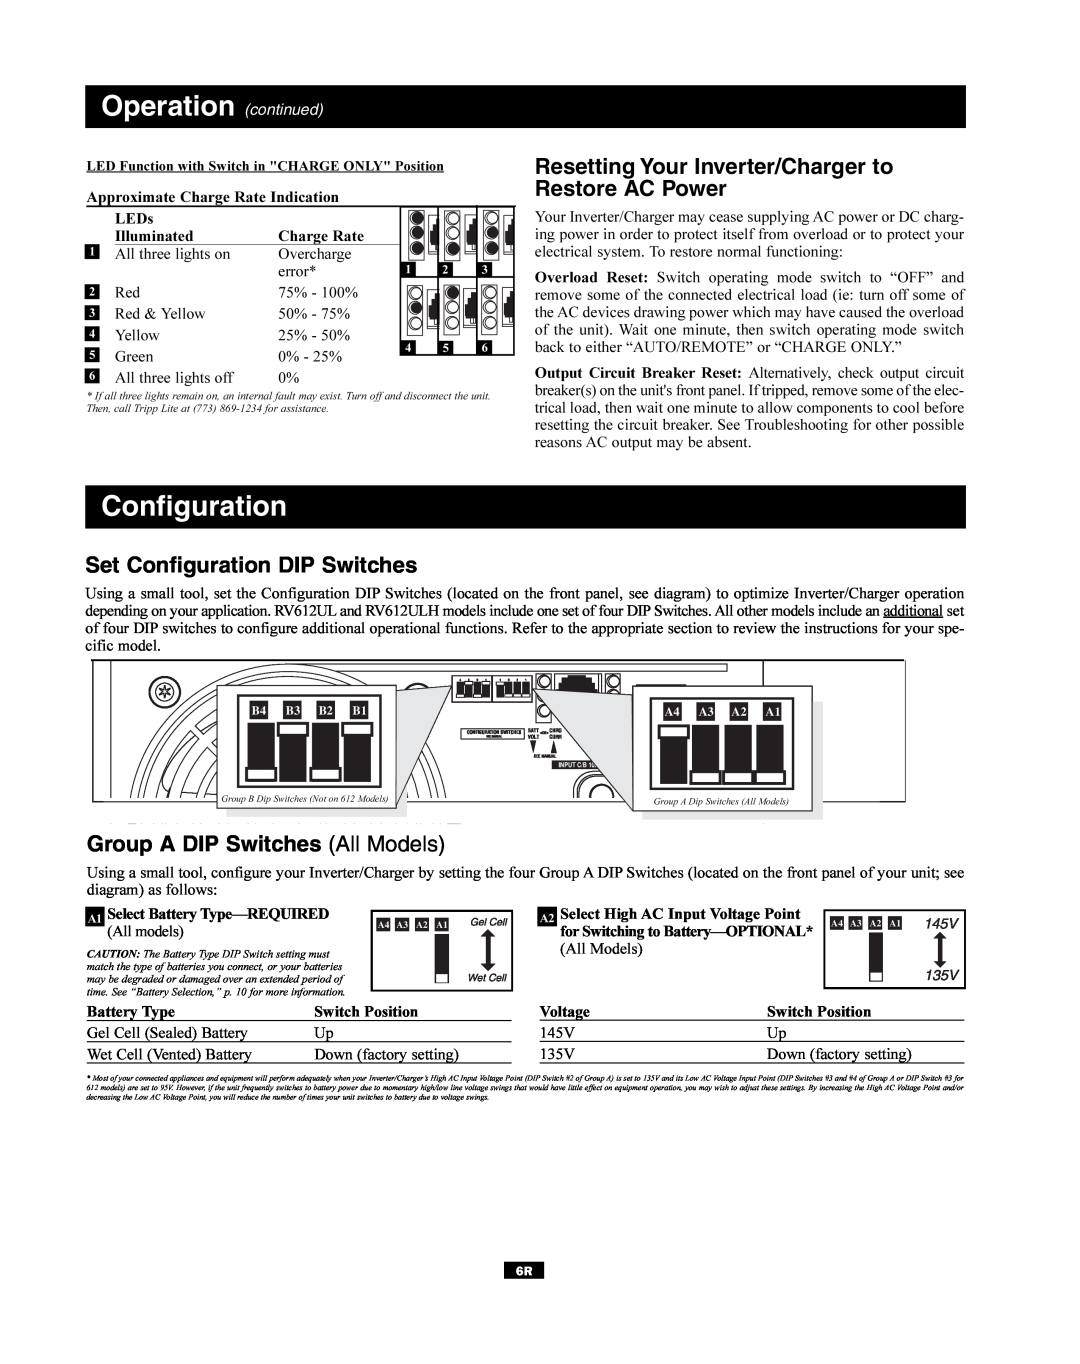 Tripp Lite RV1012UL, 200502023 Resetting Your Inverter/Charger to Restore AC Power, Set Configuration DIP Switches 